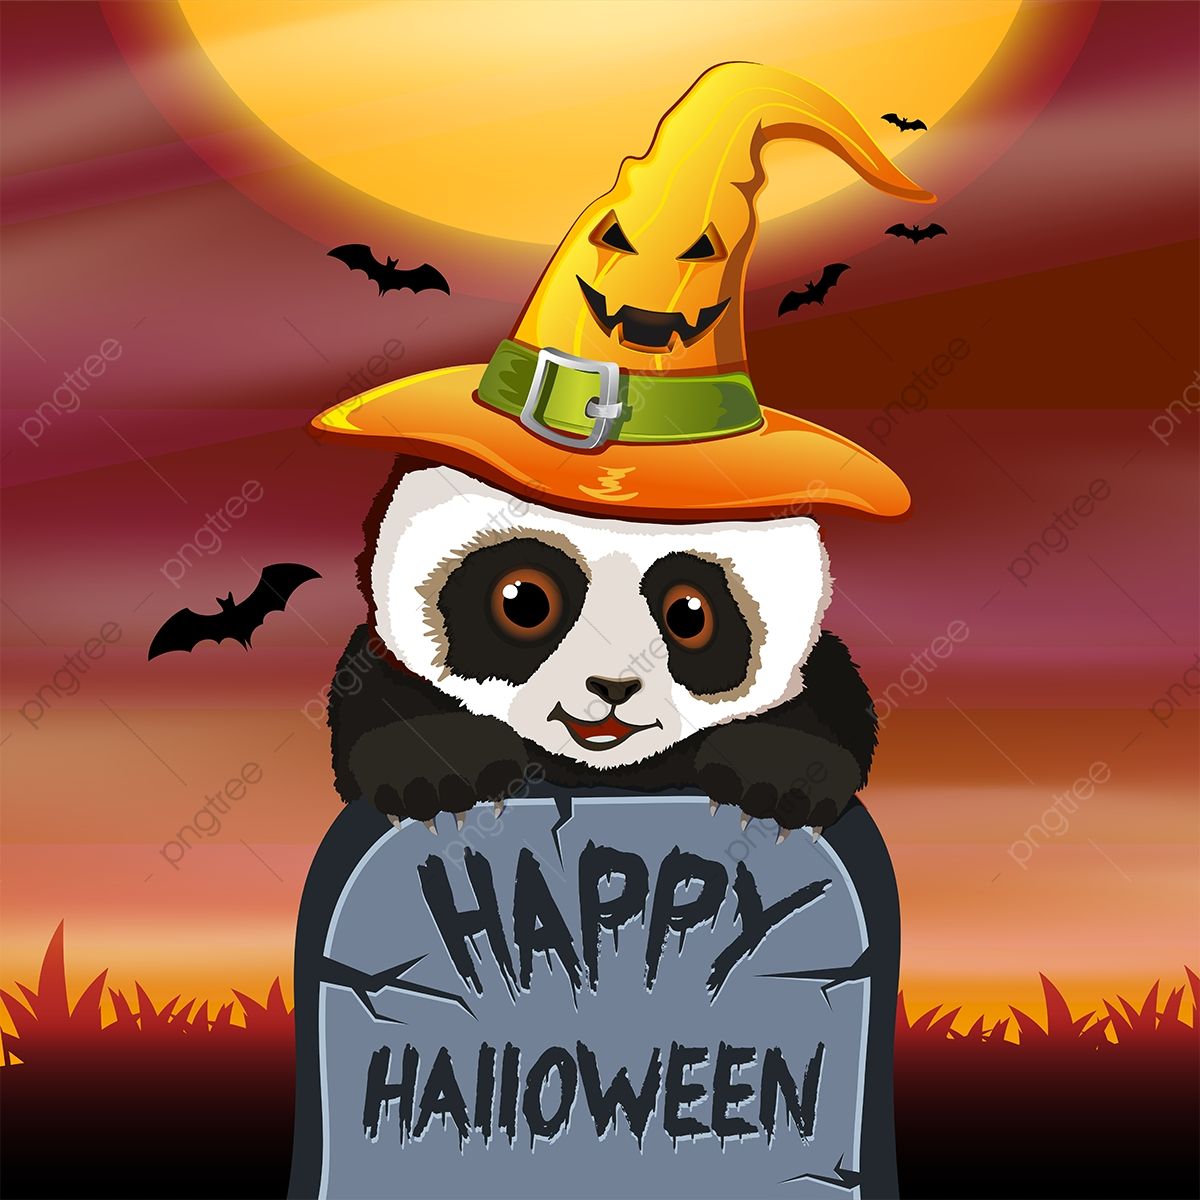 Halloween Panda, Halloween, Panda, Cute Panda PNG and Vector with Transparent Background for Free Download